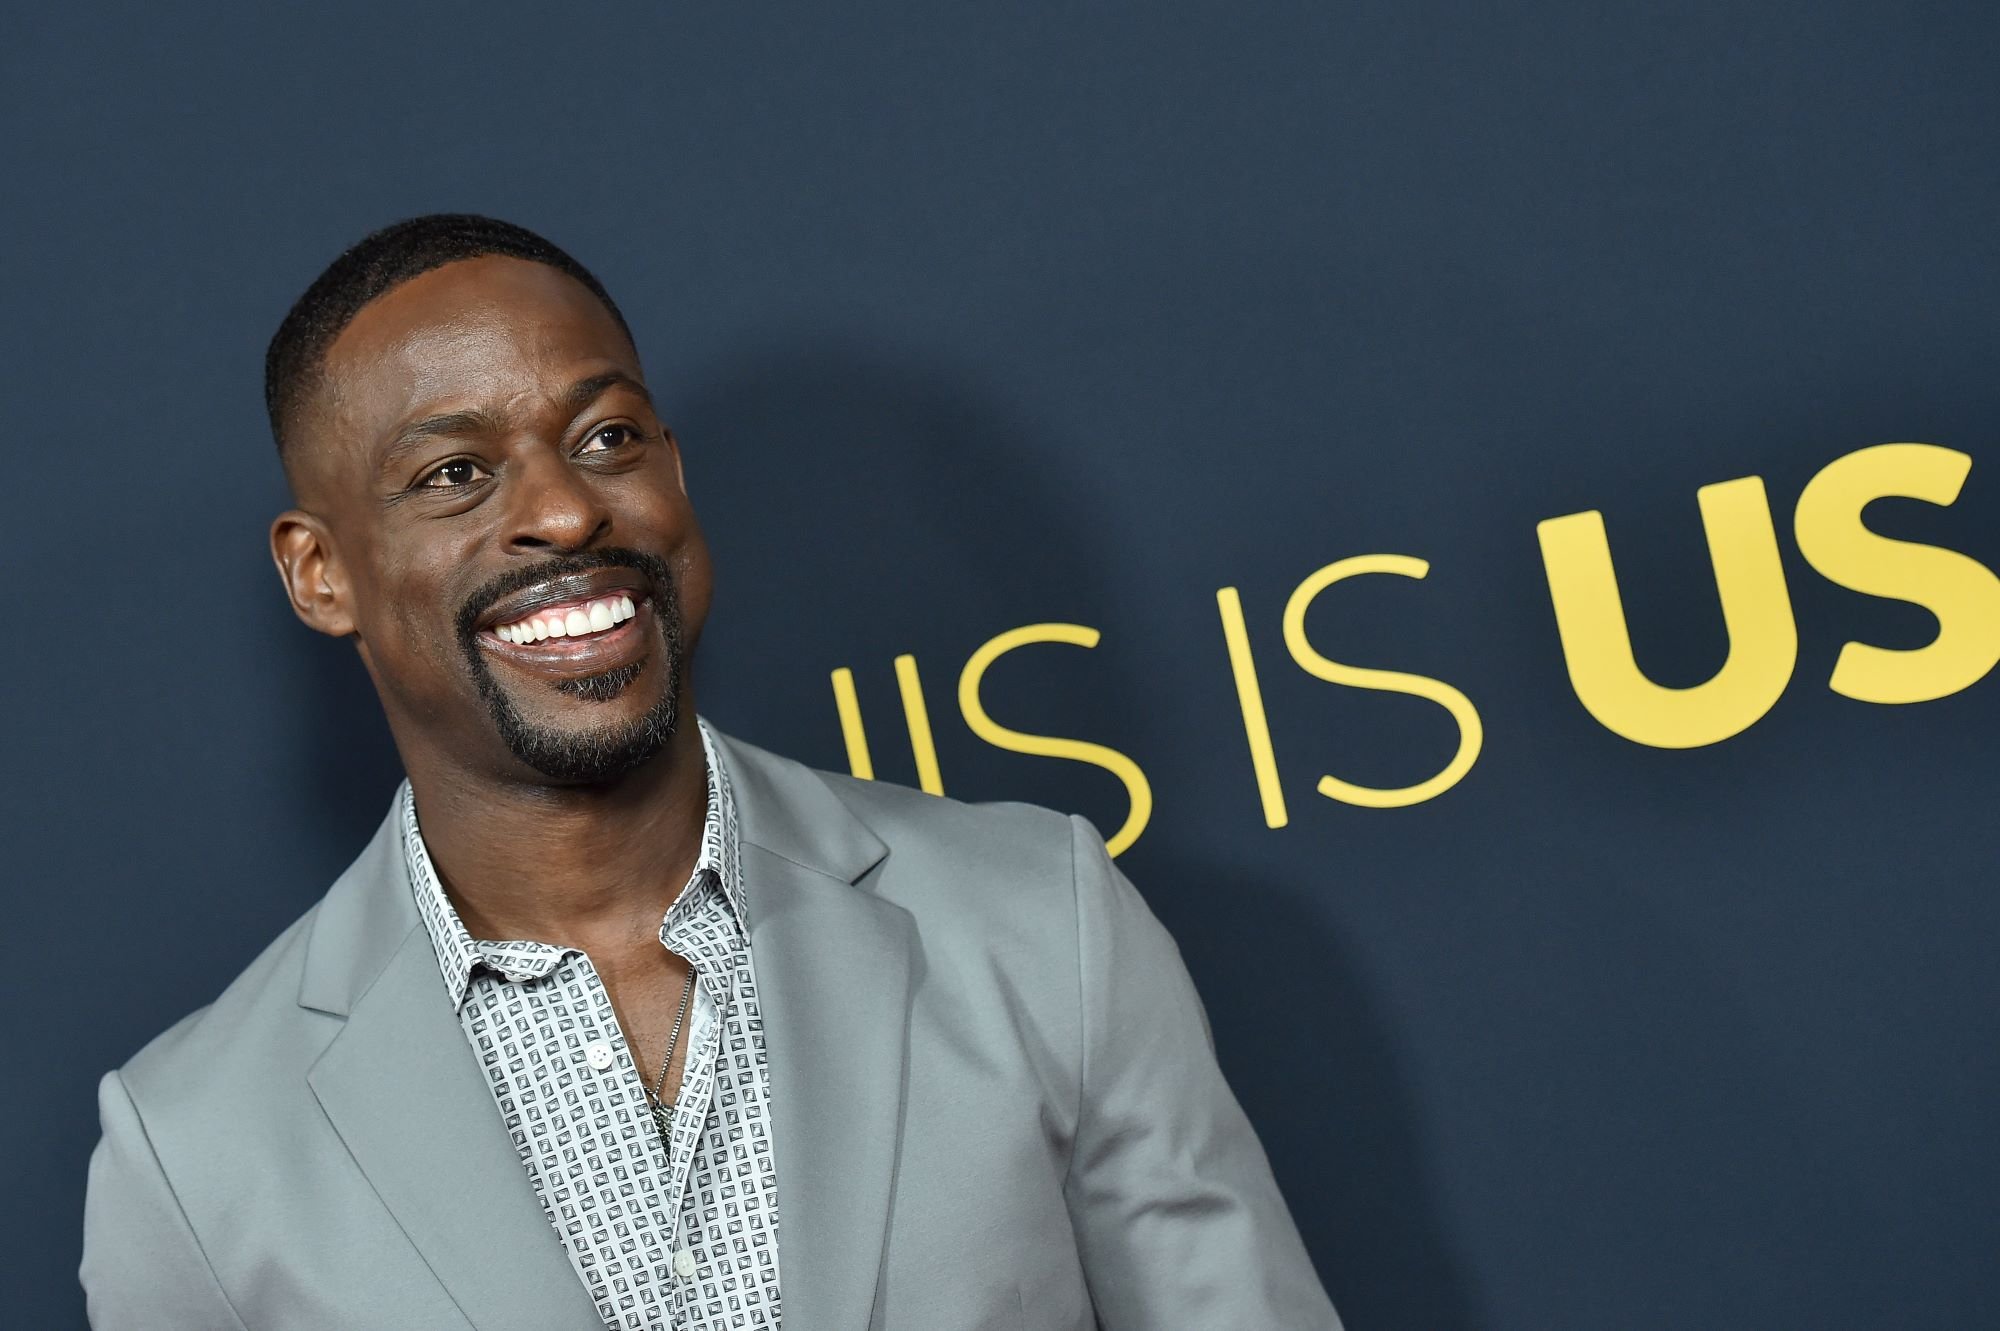 'This Is Us' Season 6 star Sterling K. Brown, who appears in the flash-forward scenes, wears a gray suit over a white patterned button-up shirt.